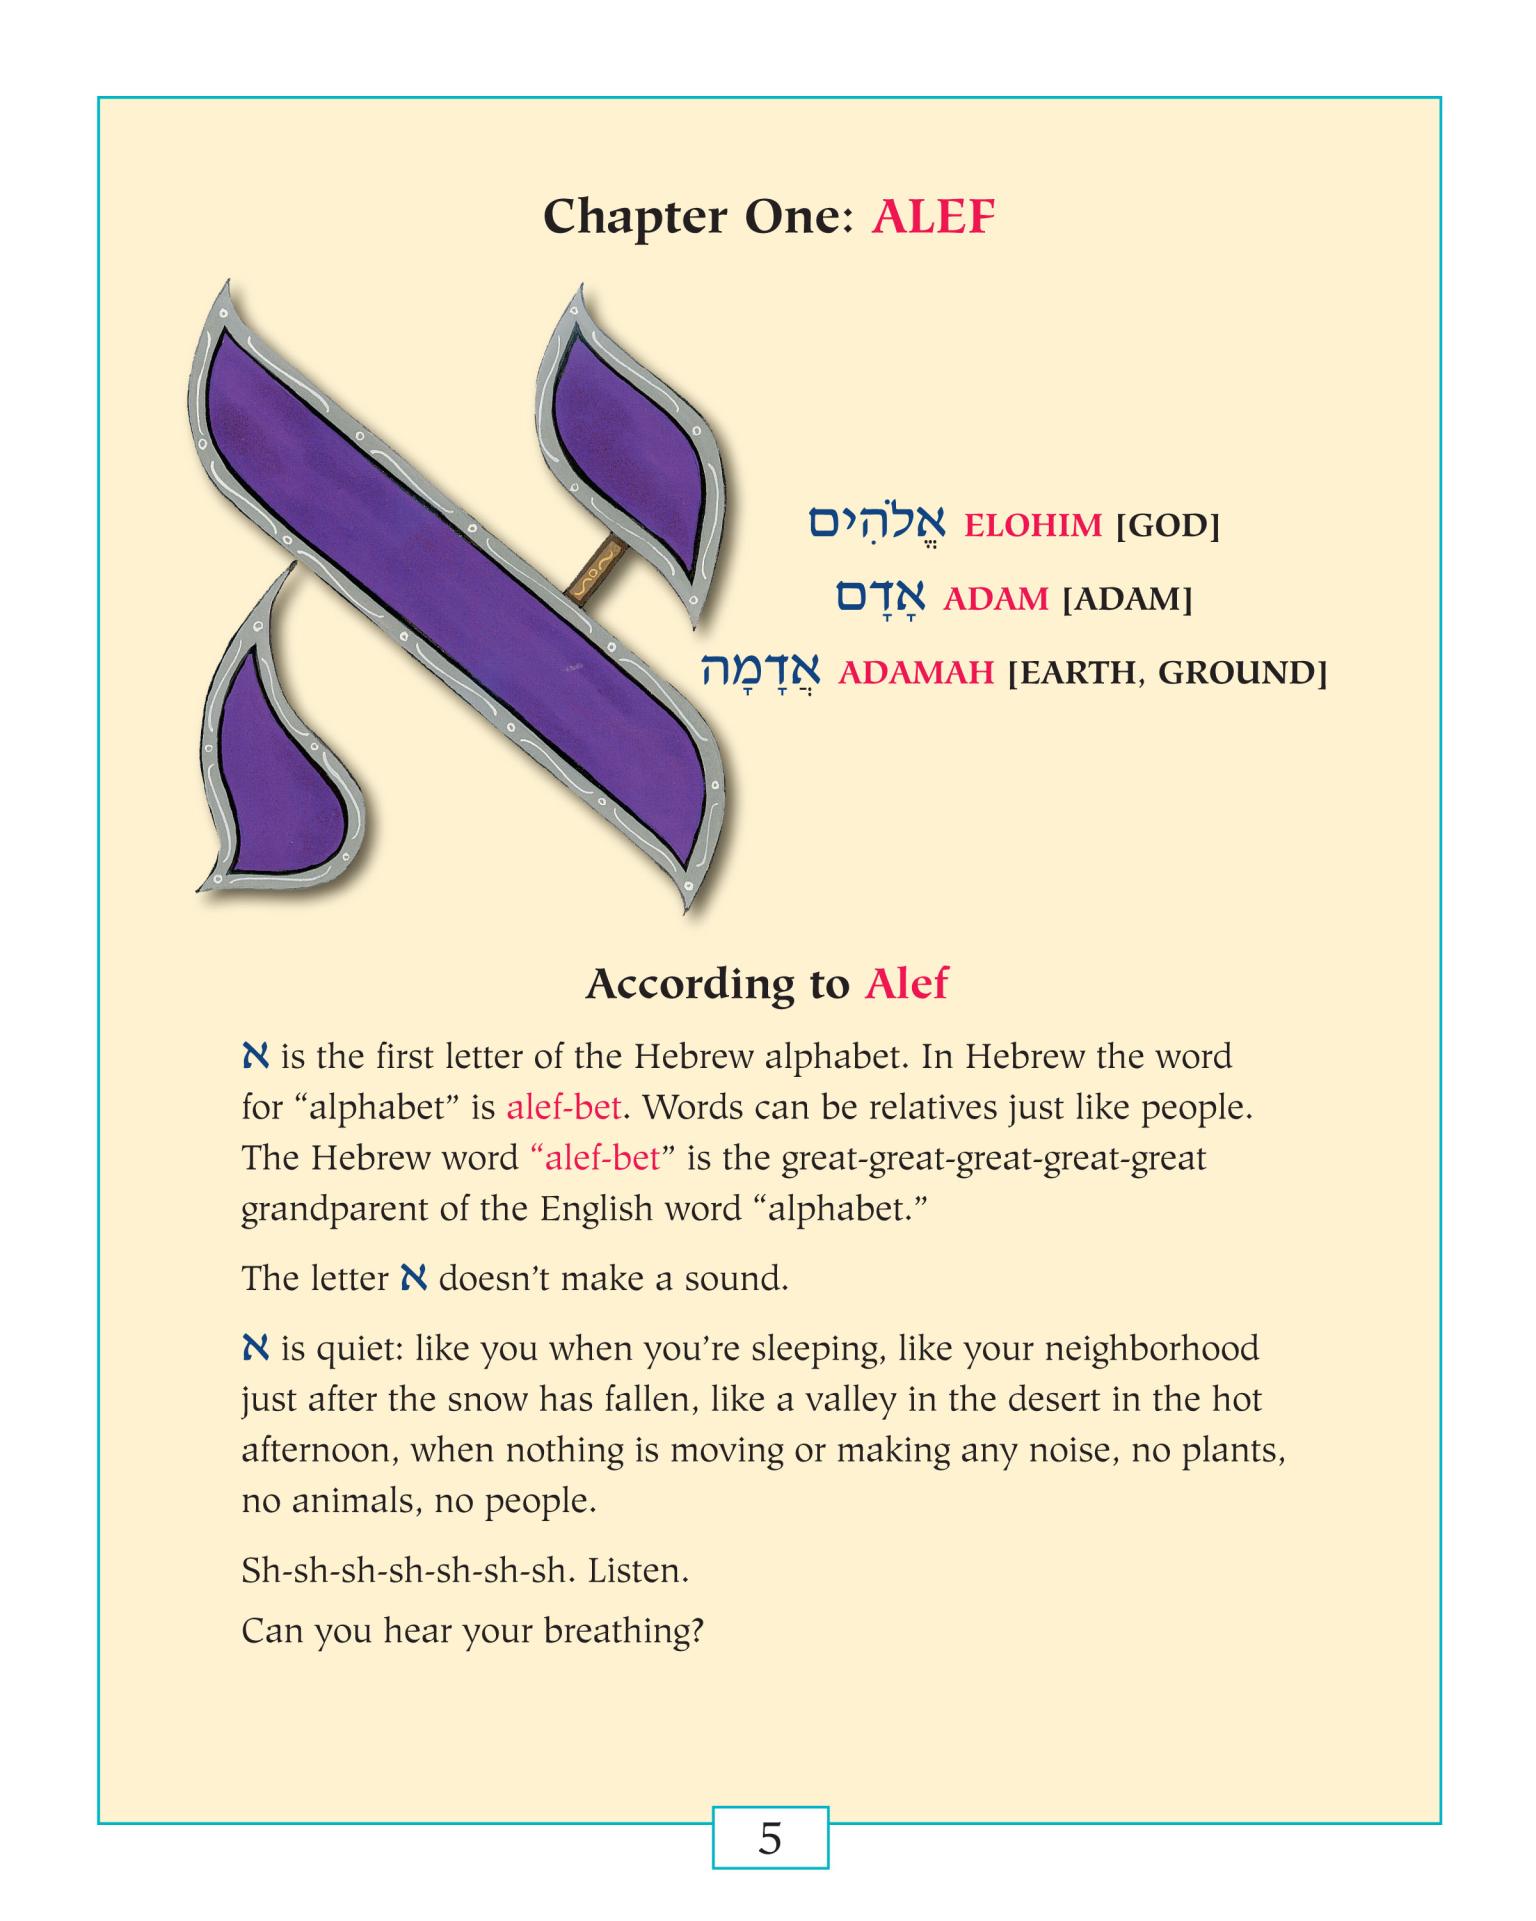 Page with the Hebrew letter aleph, and English text describing the significance of the letter. 